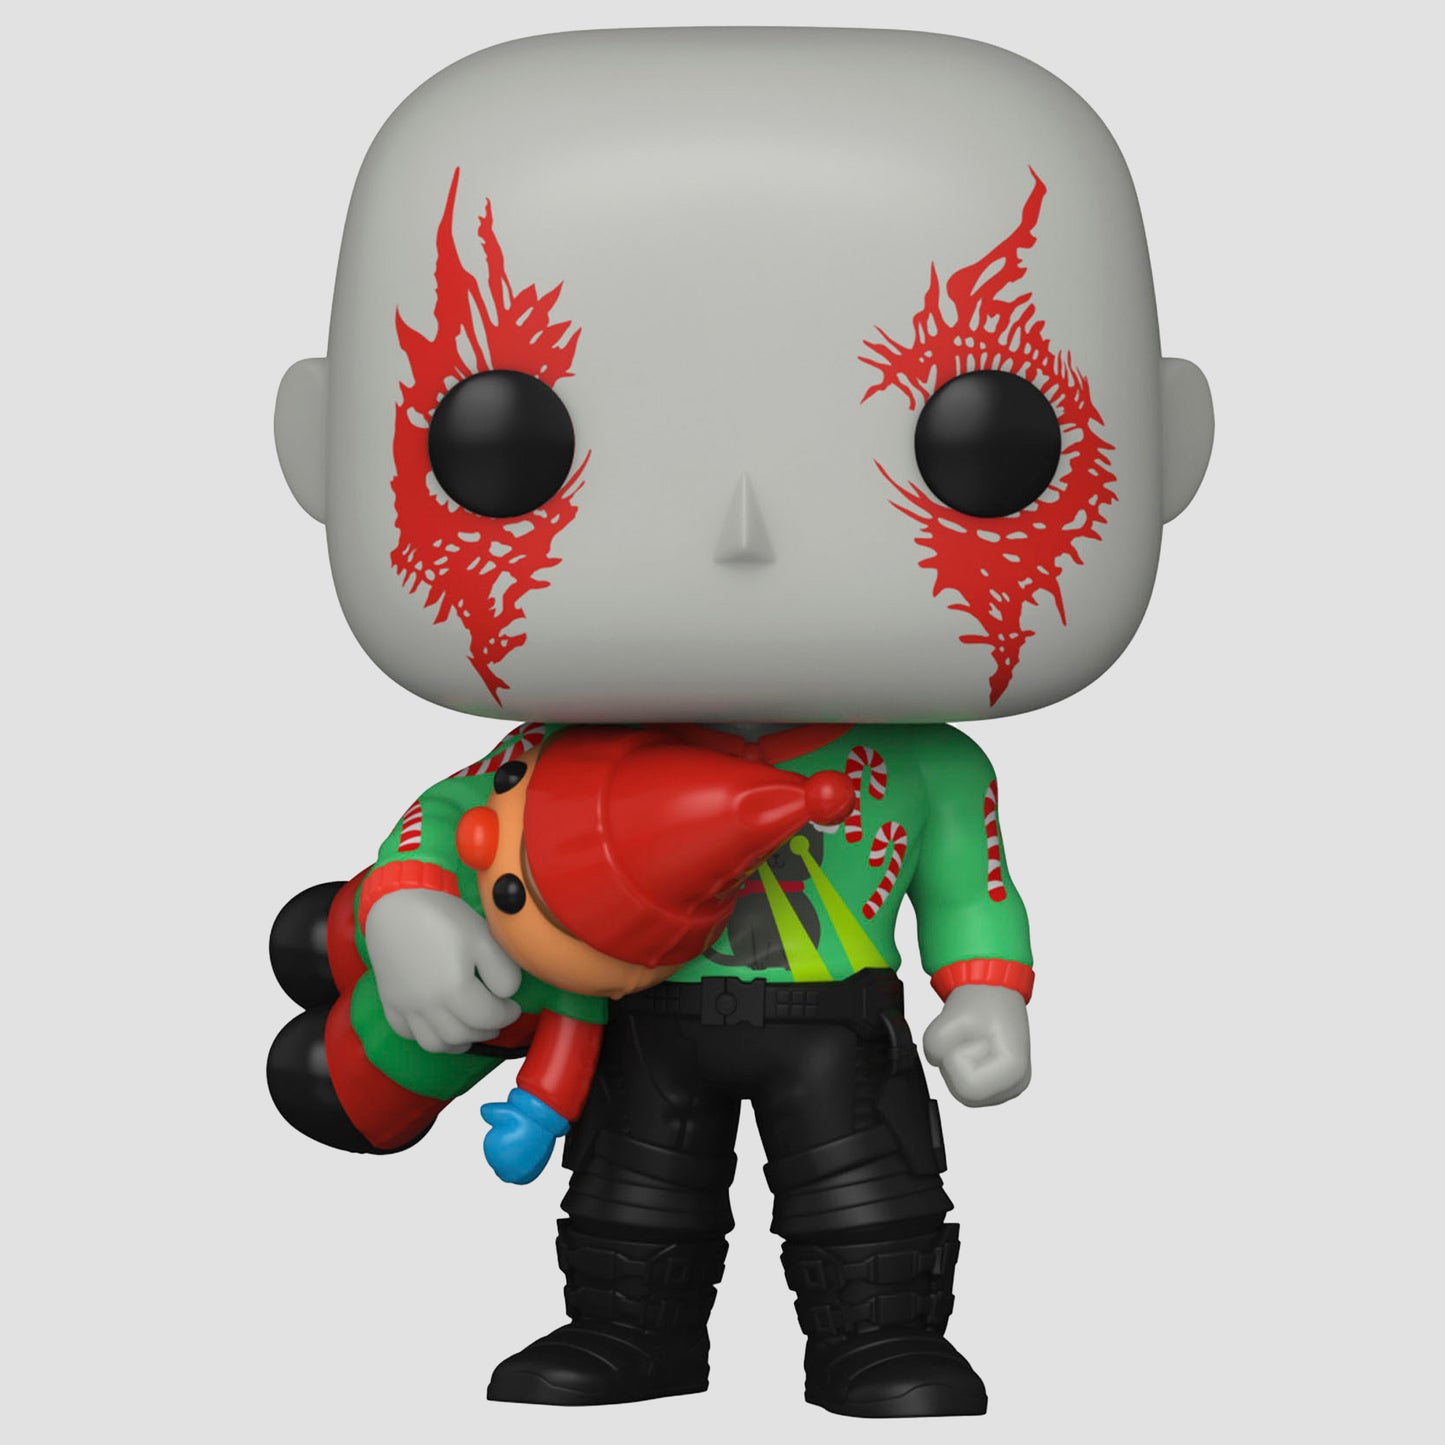 Drax (Guardians of the Galaxy: Holiday Special) Marvel Funko Pop!